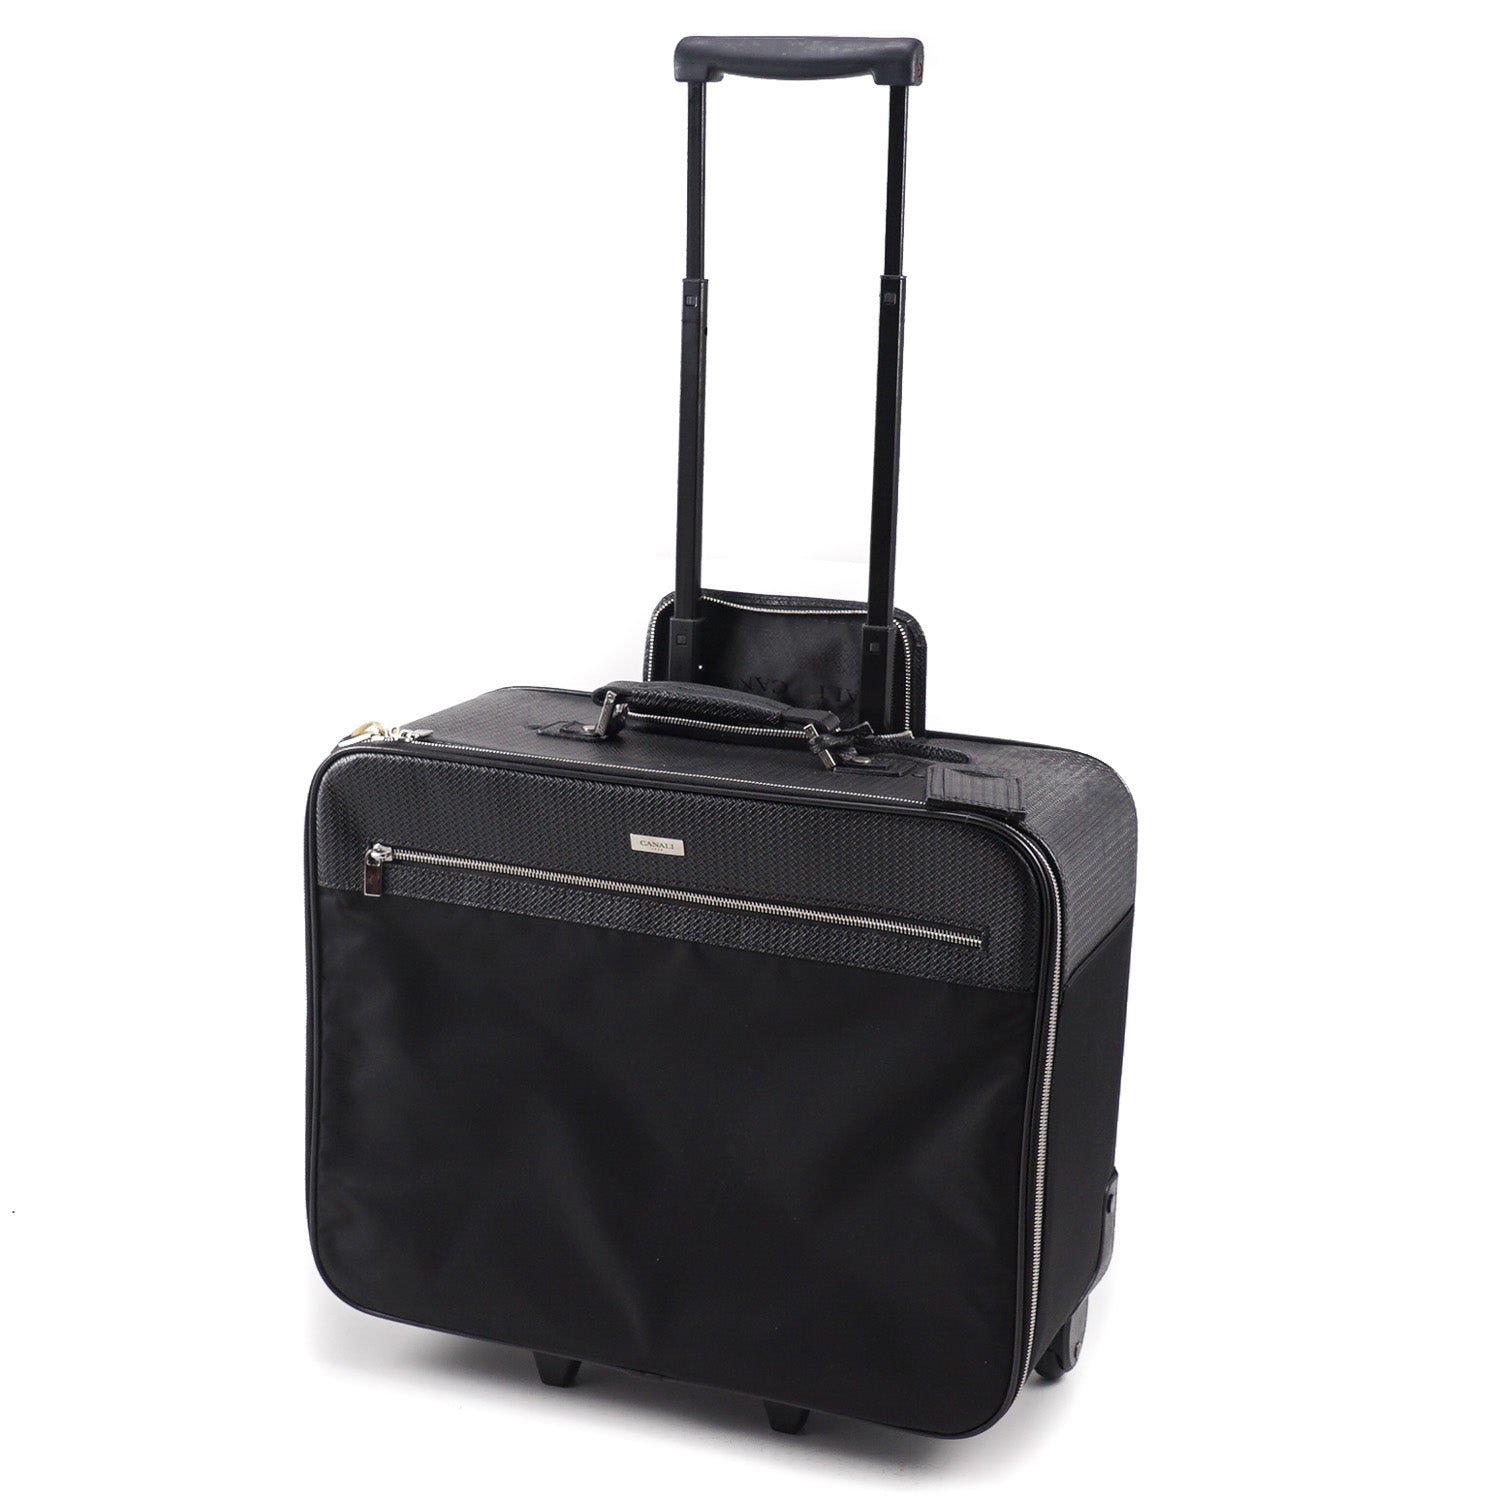 Canali Leather and Nylon Carry-On Roller Suitcase - Top Shelf Apparel